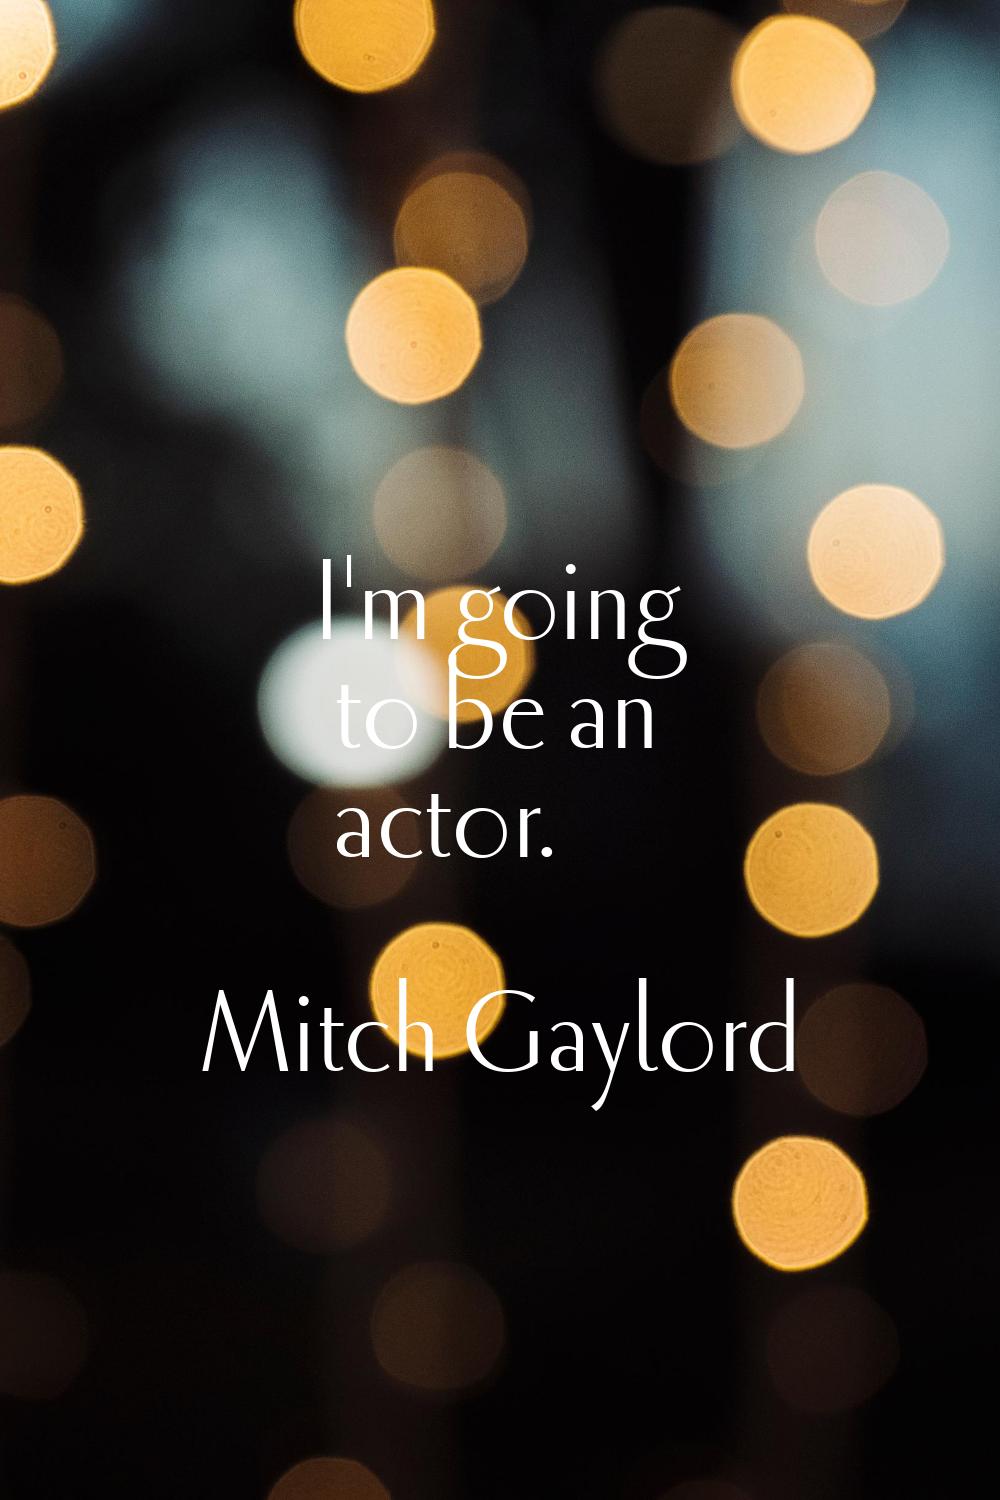 I'm going to be an actor.